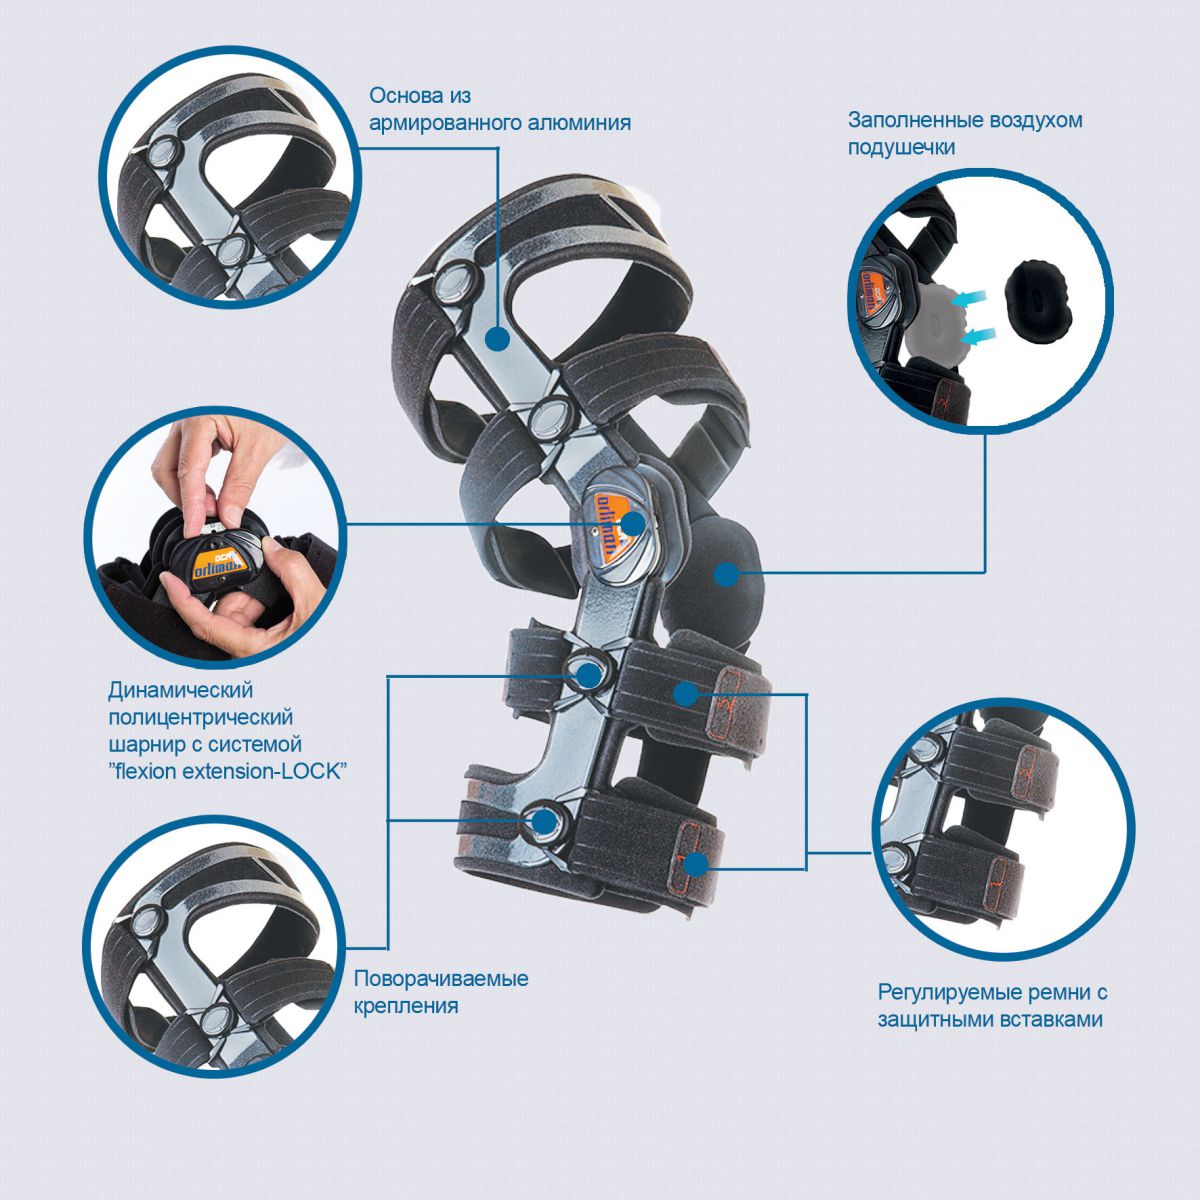 OCR200L / 3 Functional flexion-extensor orthosis